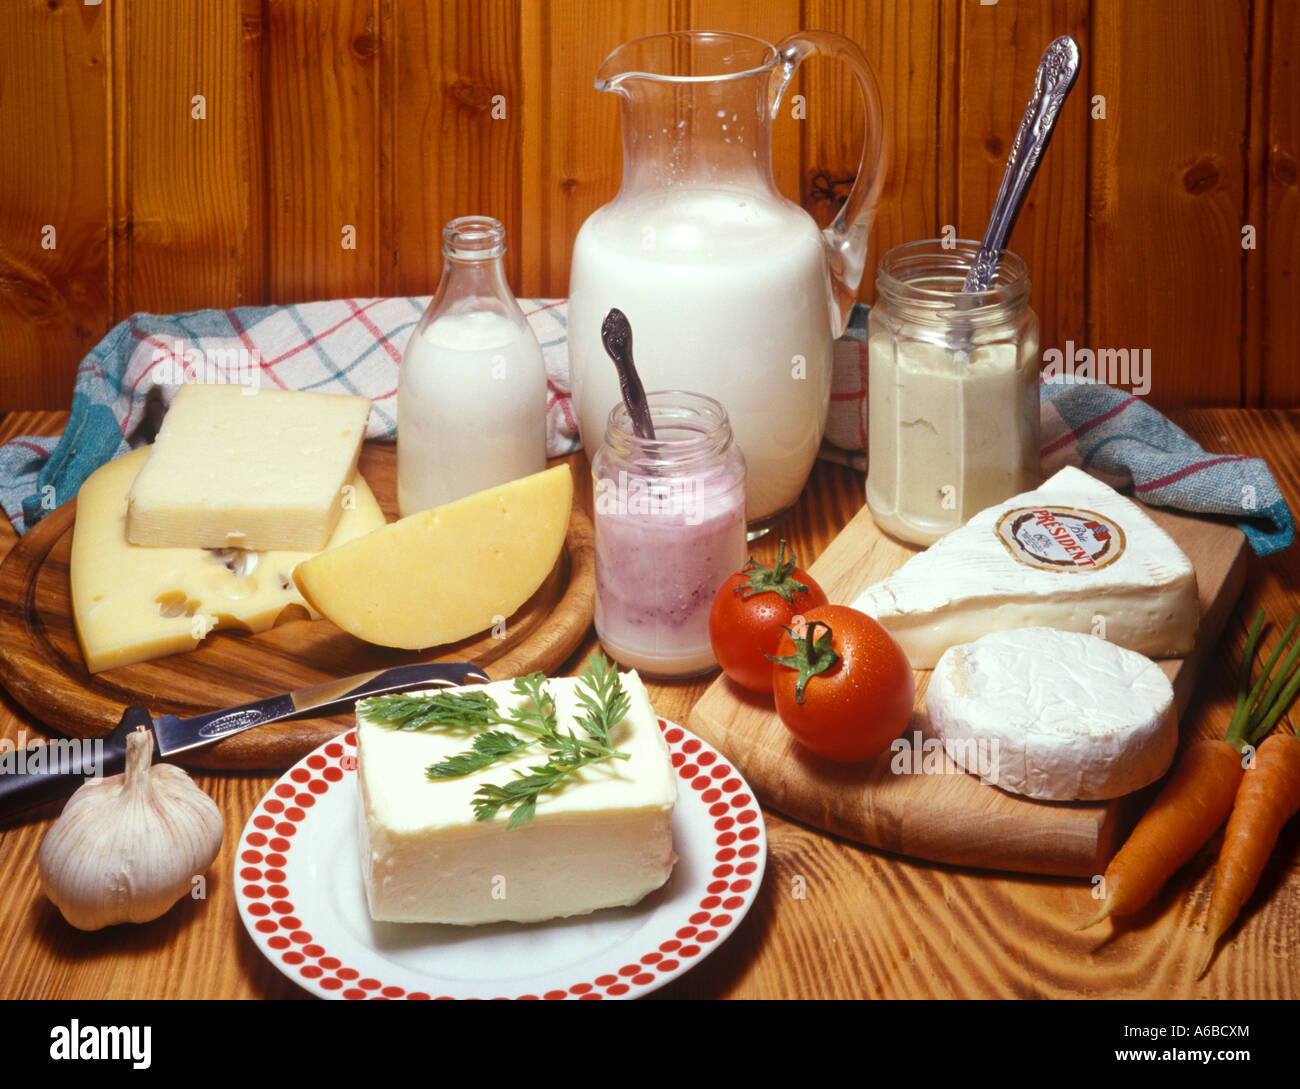 milk and chees products Stock Photo